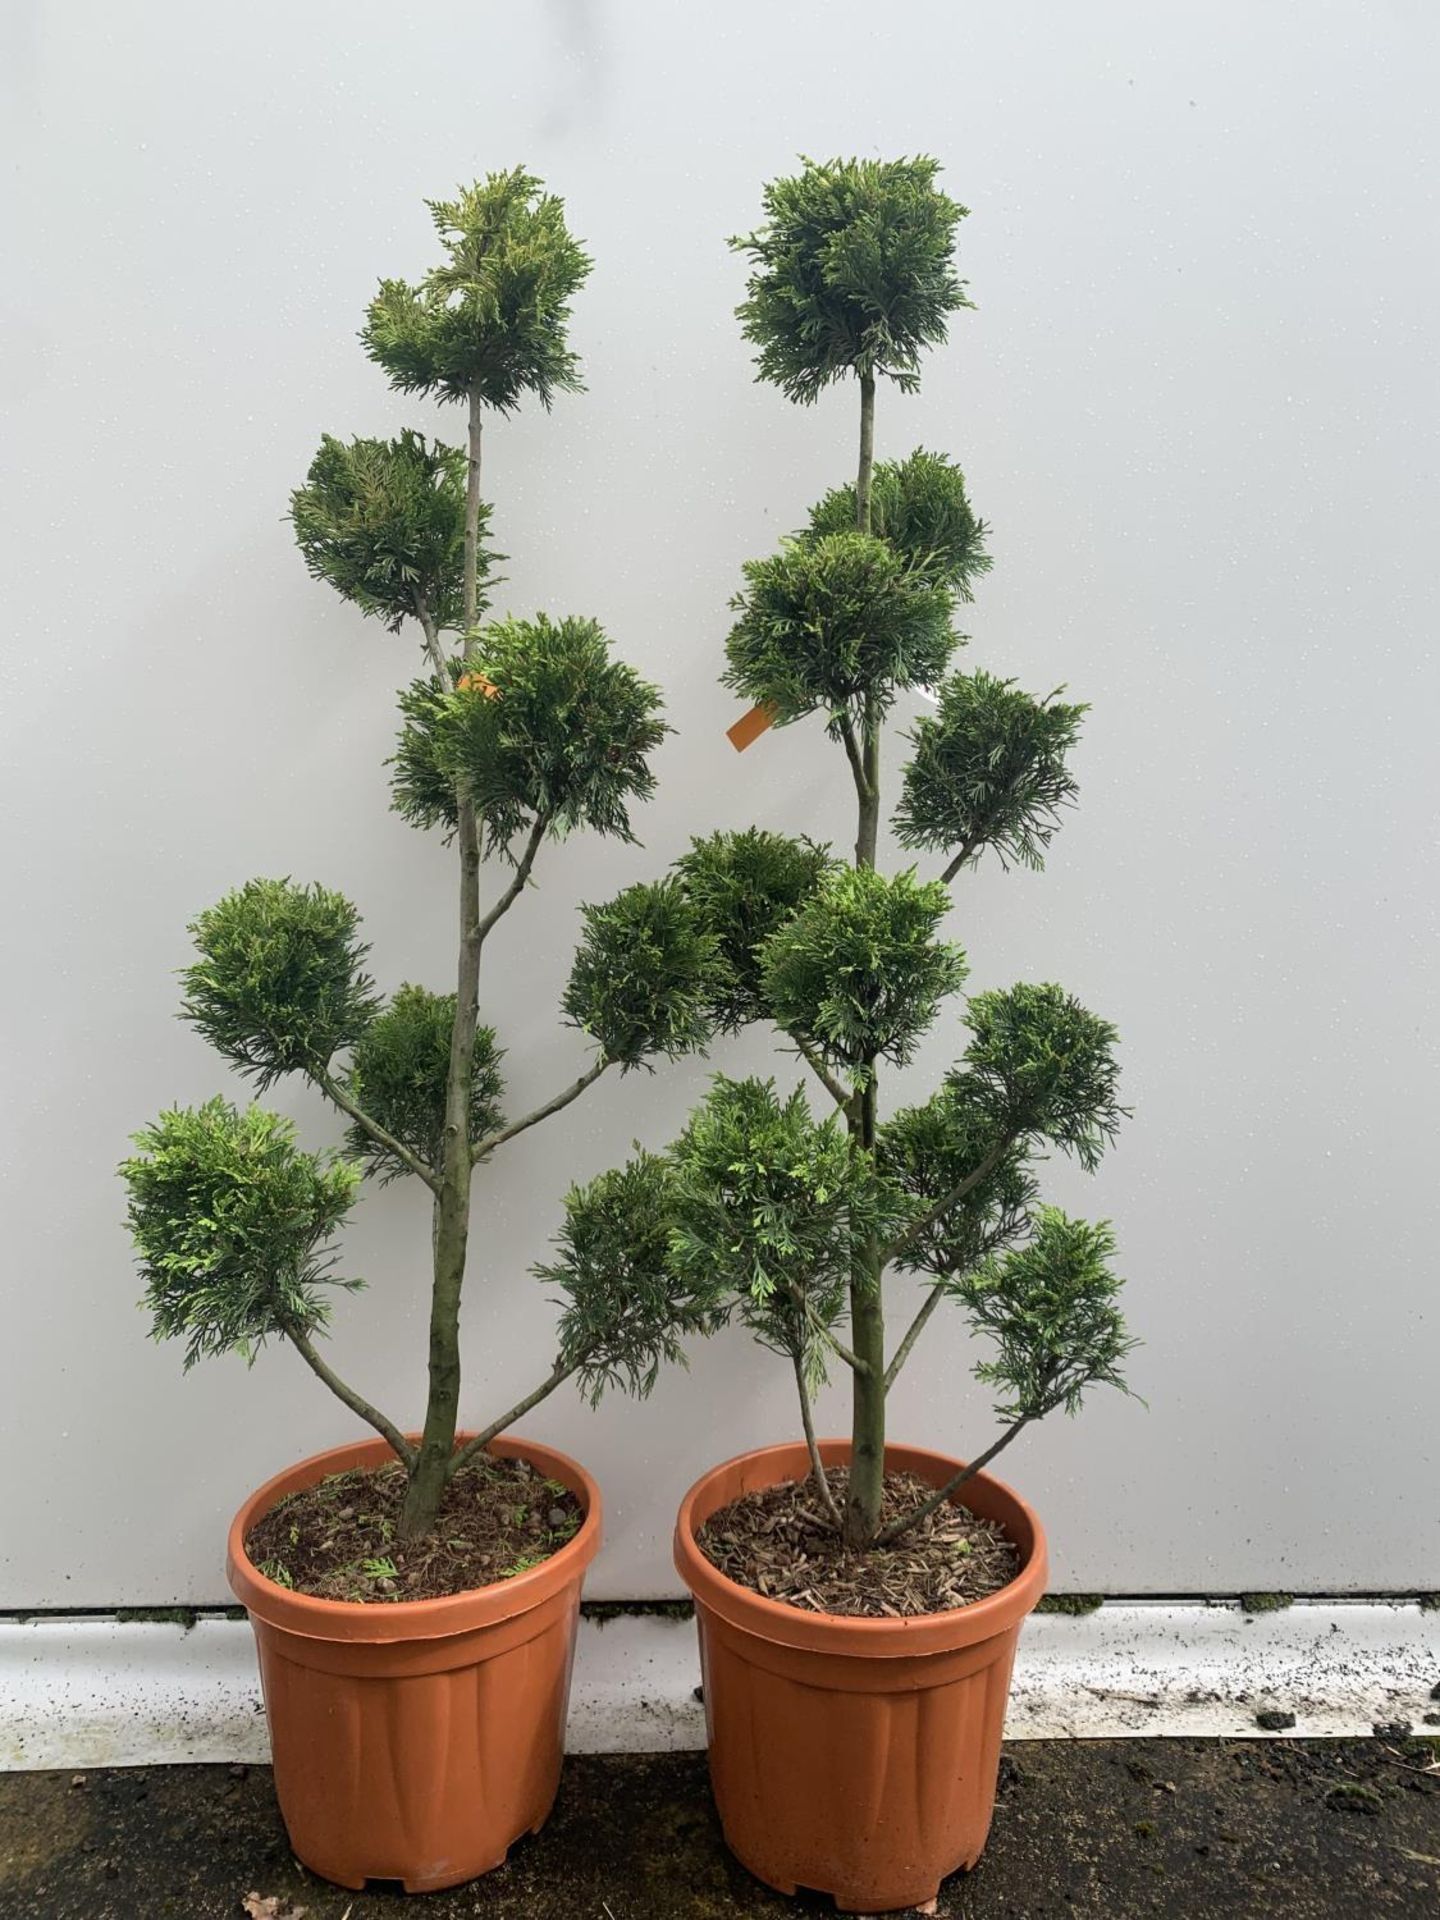 TWO POM POM TREES CUPRESSOCYPARIS LEYLANDII 'GOLD RIDER' APPROX 150CM IN HEIGHT IN 15 LTR POTS - Image 4 of 7